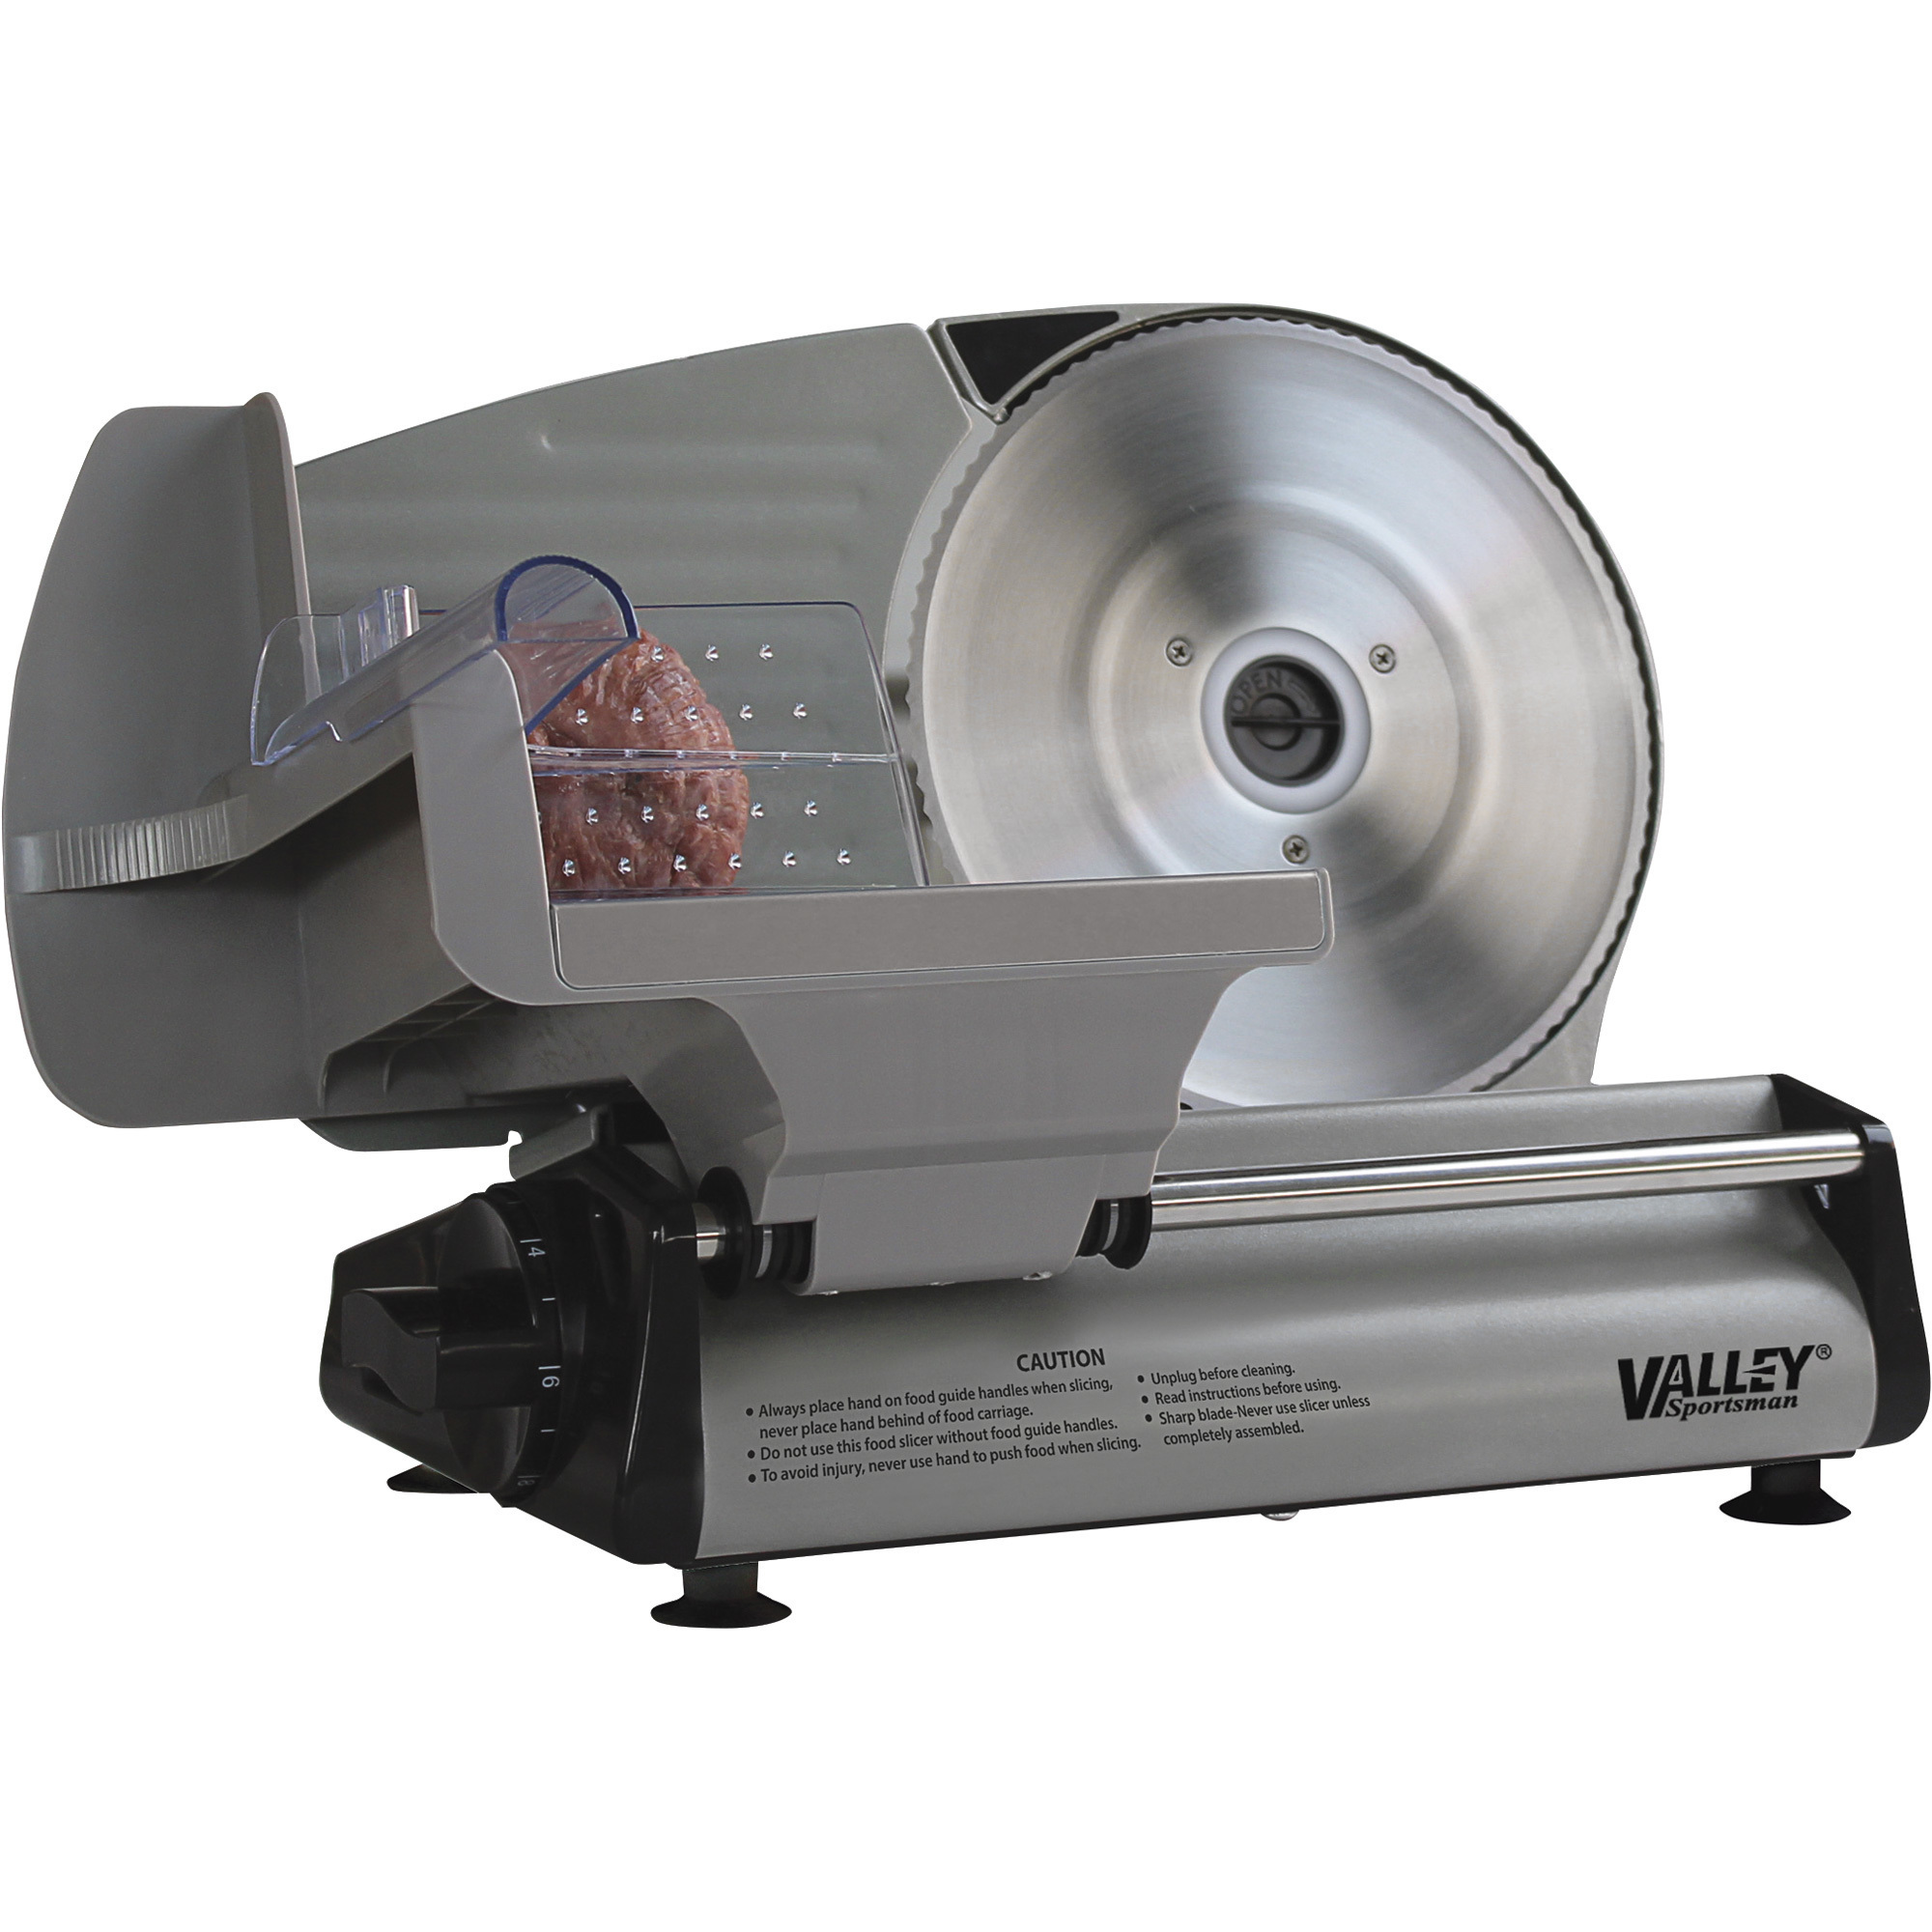 8.7Inch Stainless Steel Electric Food and Meat Slicer